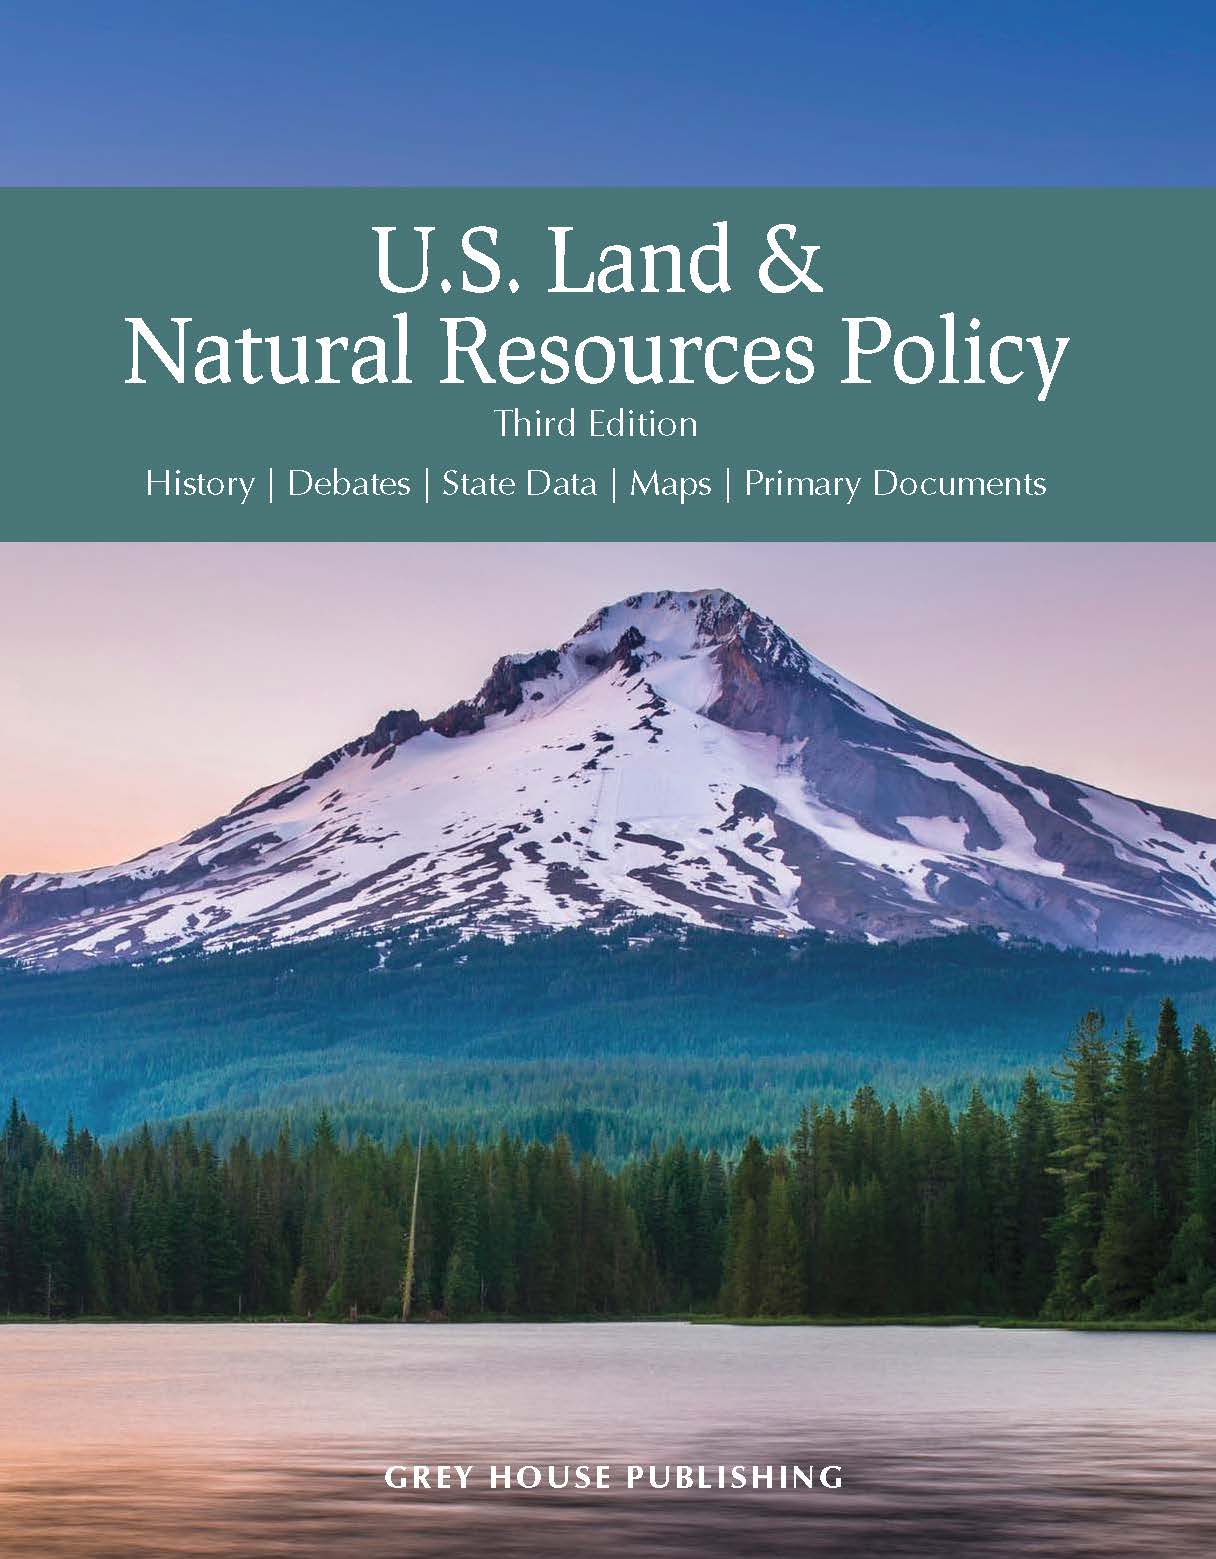 U.S. Land & Natural Resources Policy